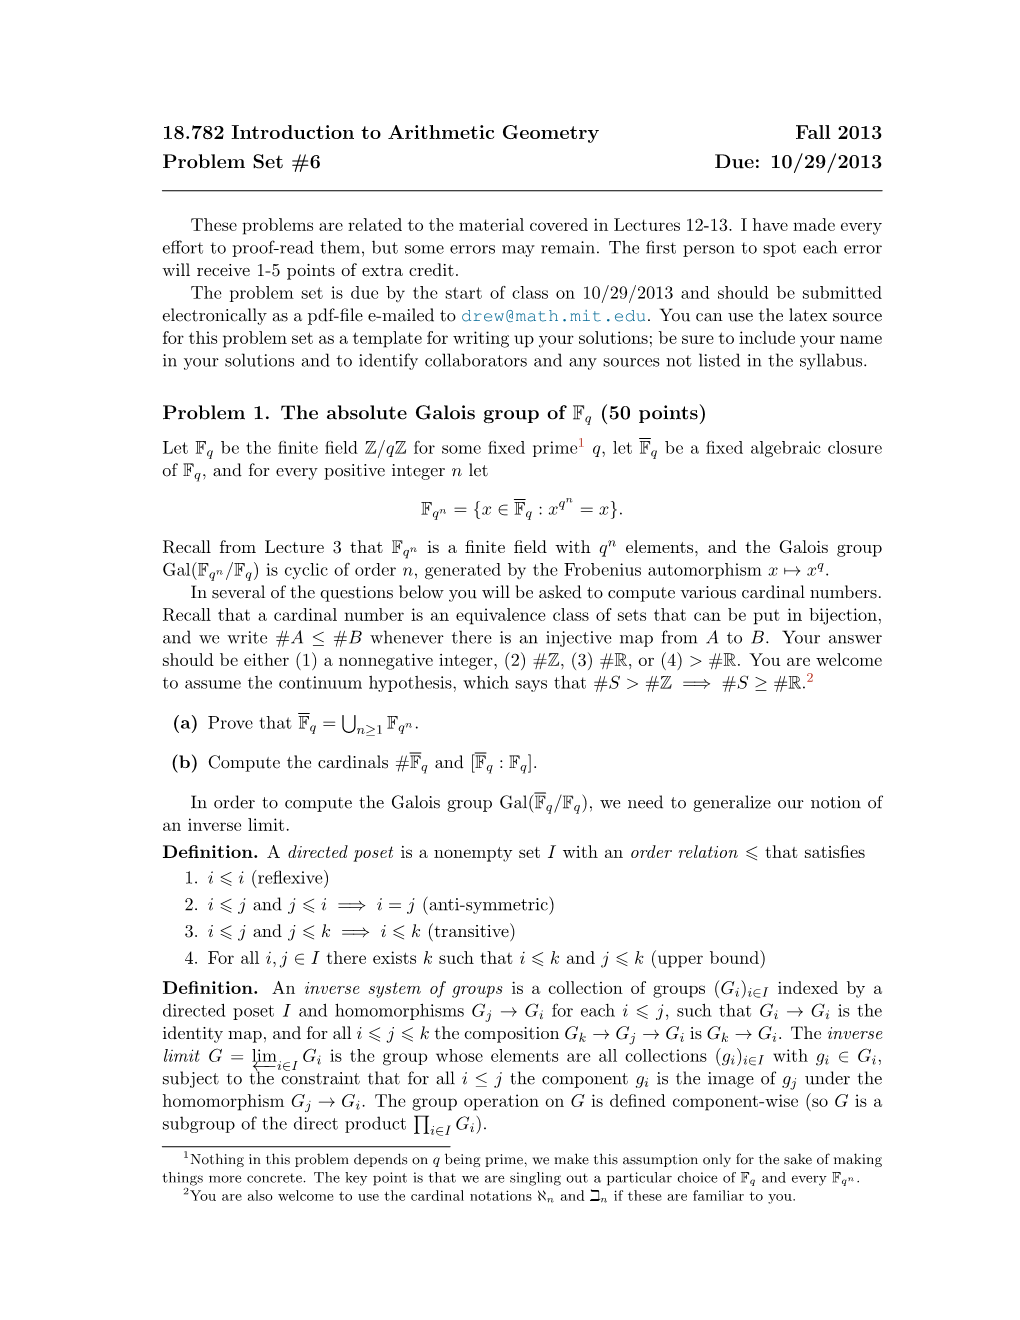 10/29/2013 Problem 1. the Absolute Galois Group of Fq